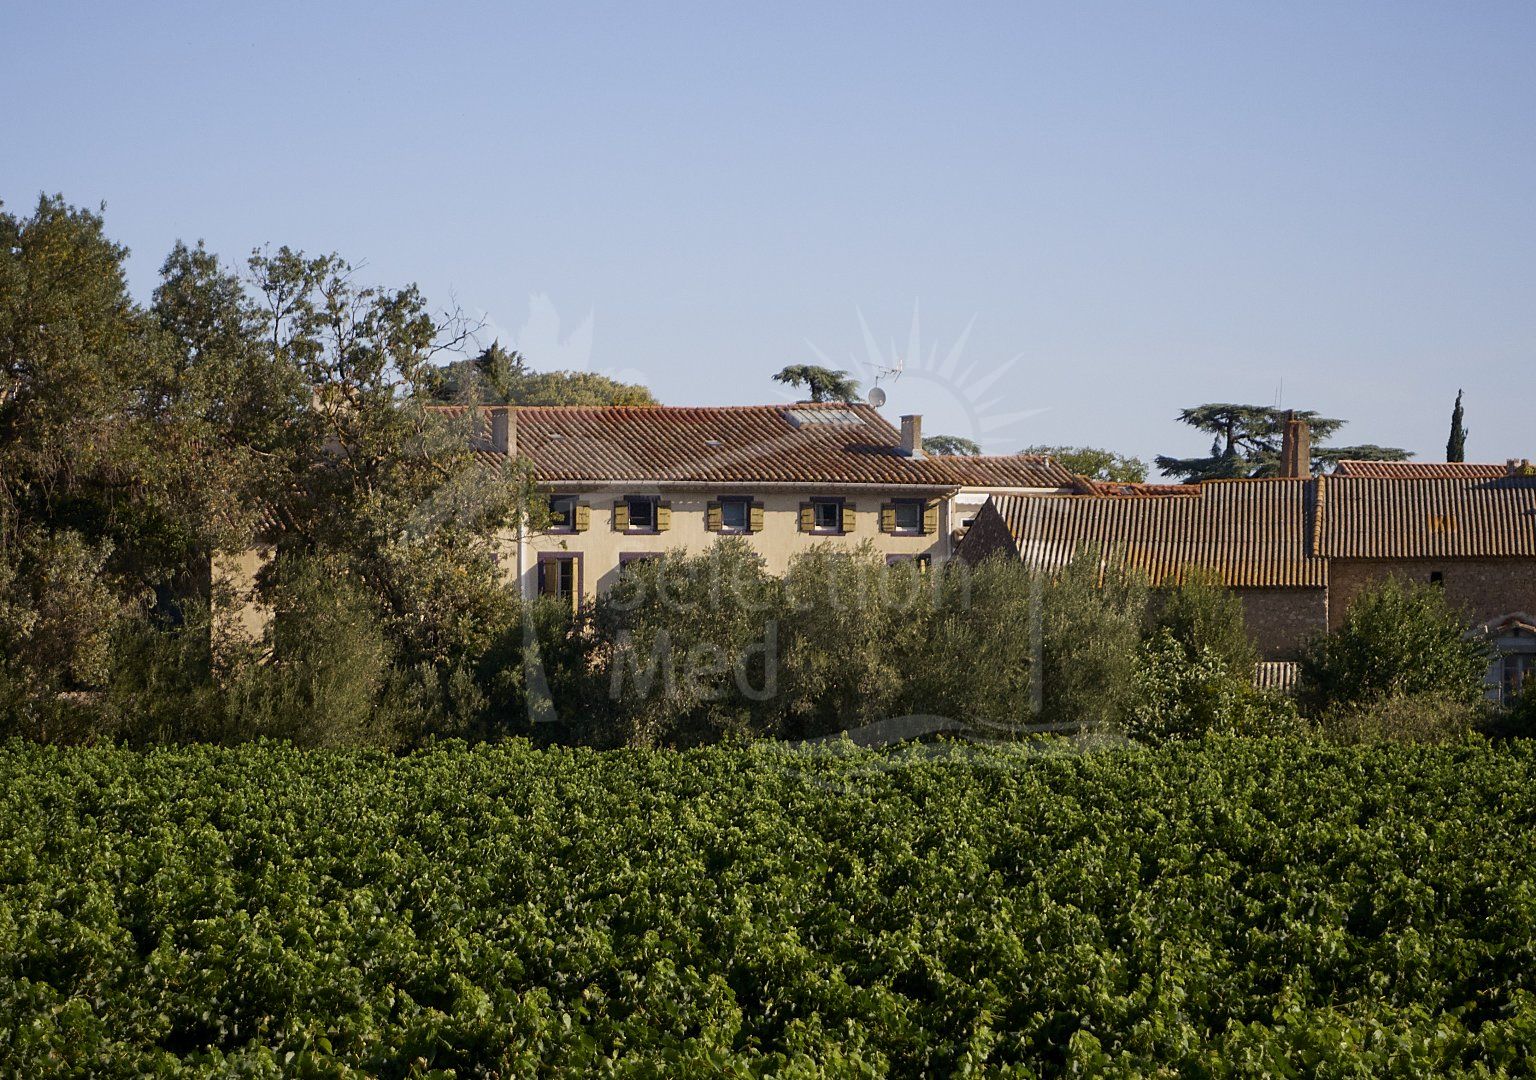 Renovated wine domaine, 980 M2, many orginal details: 5 appartments + 4 BnB rooms + large barn 15 mn from NARBONNE